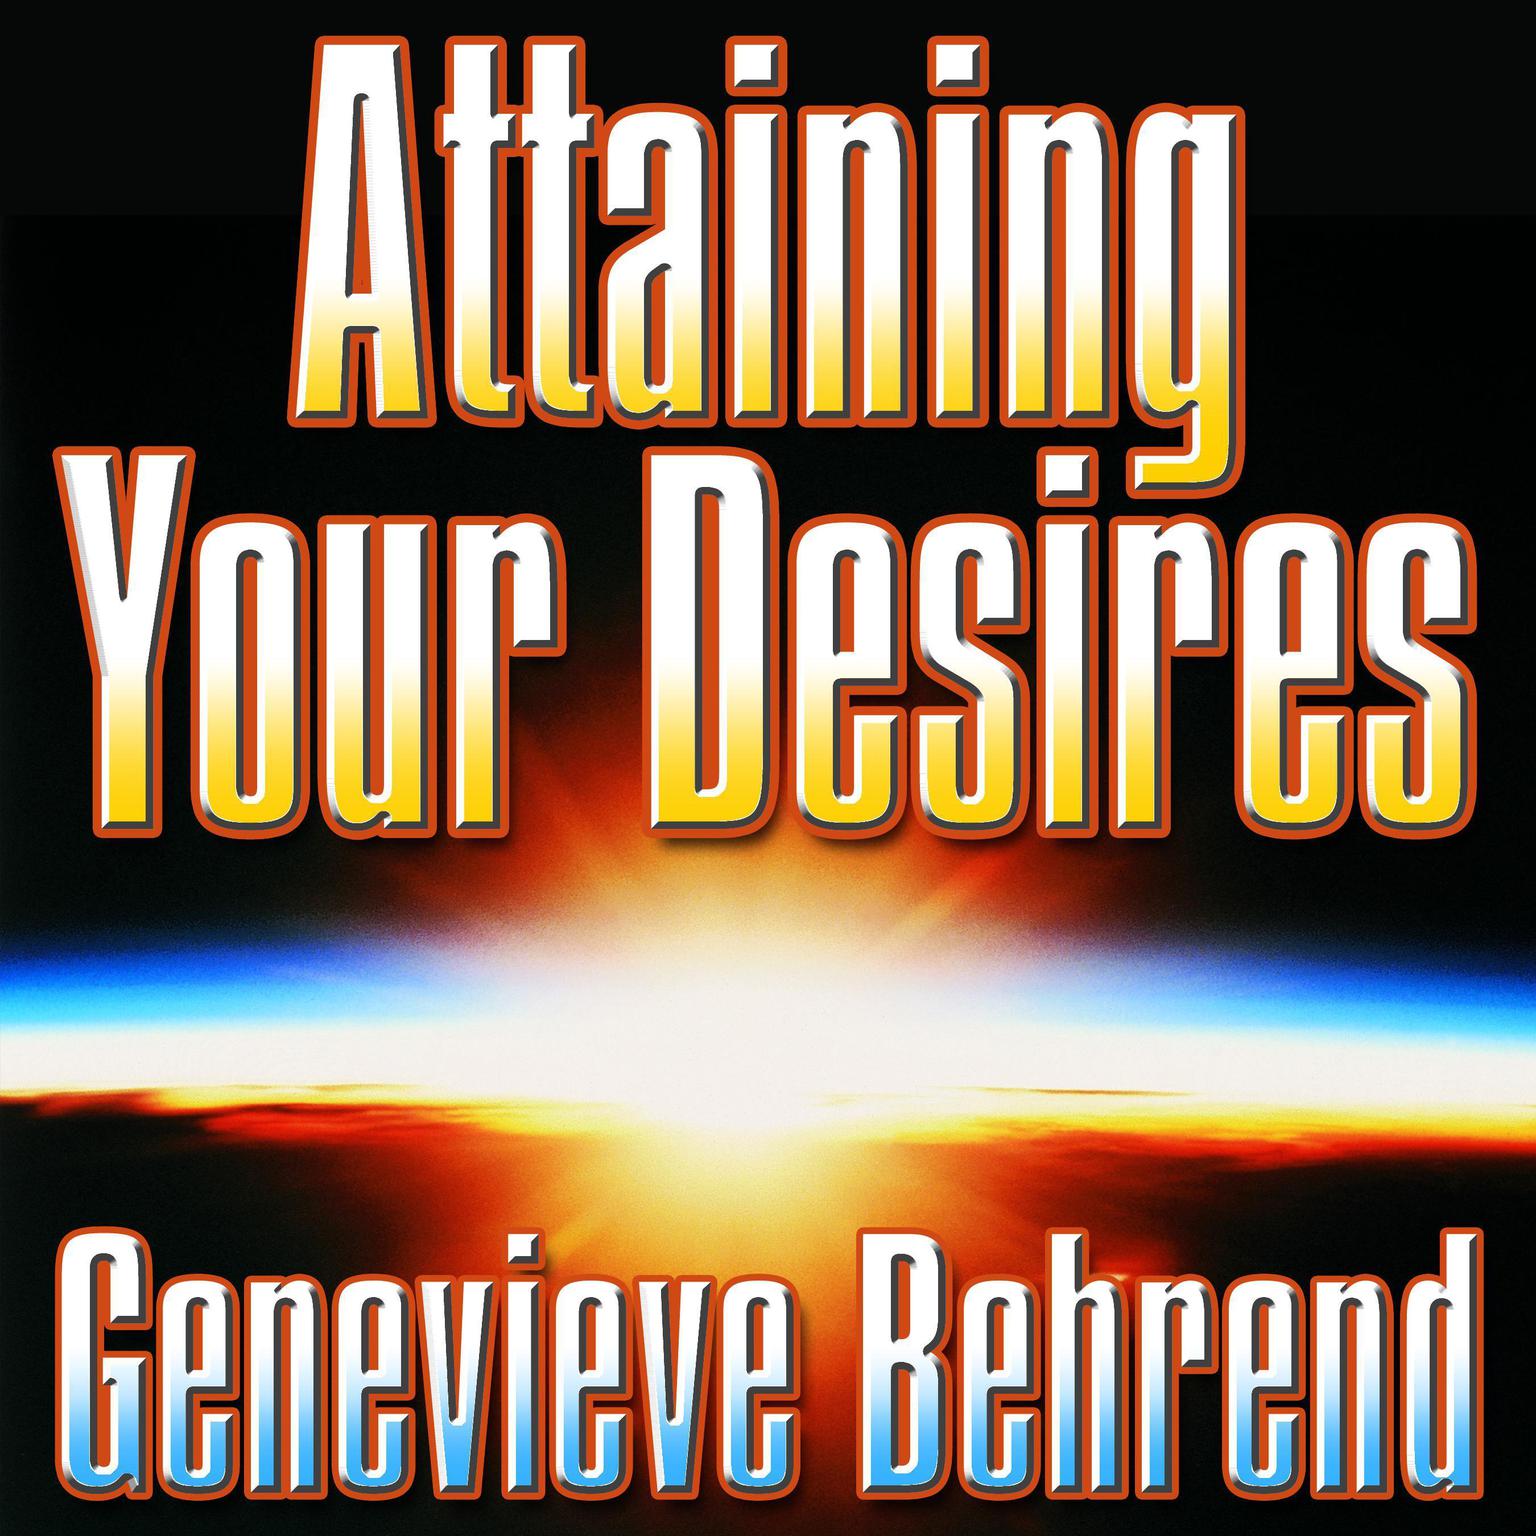 Attaining Your Desires: By Letting Your Subconscious Mind Work for You Audiobook, by Genevieve Behrend